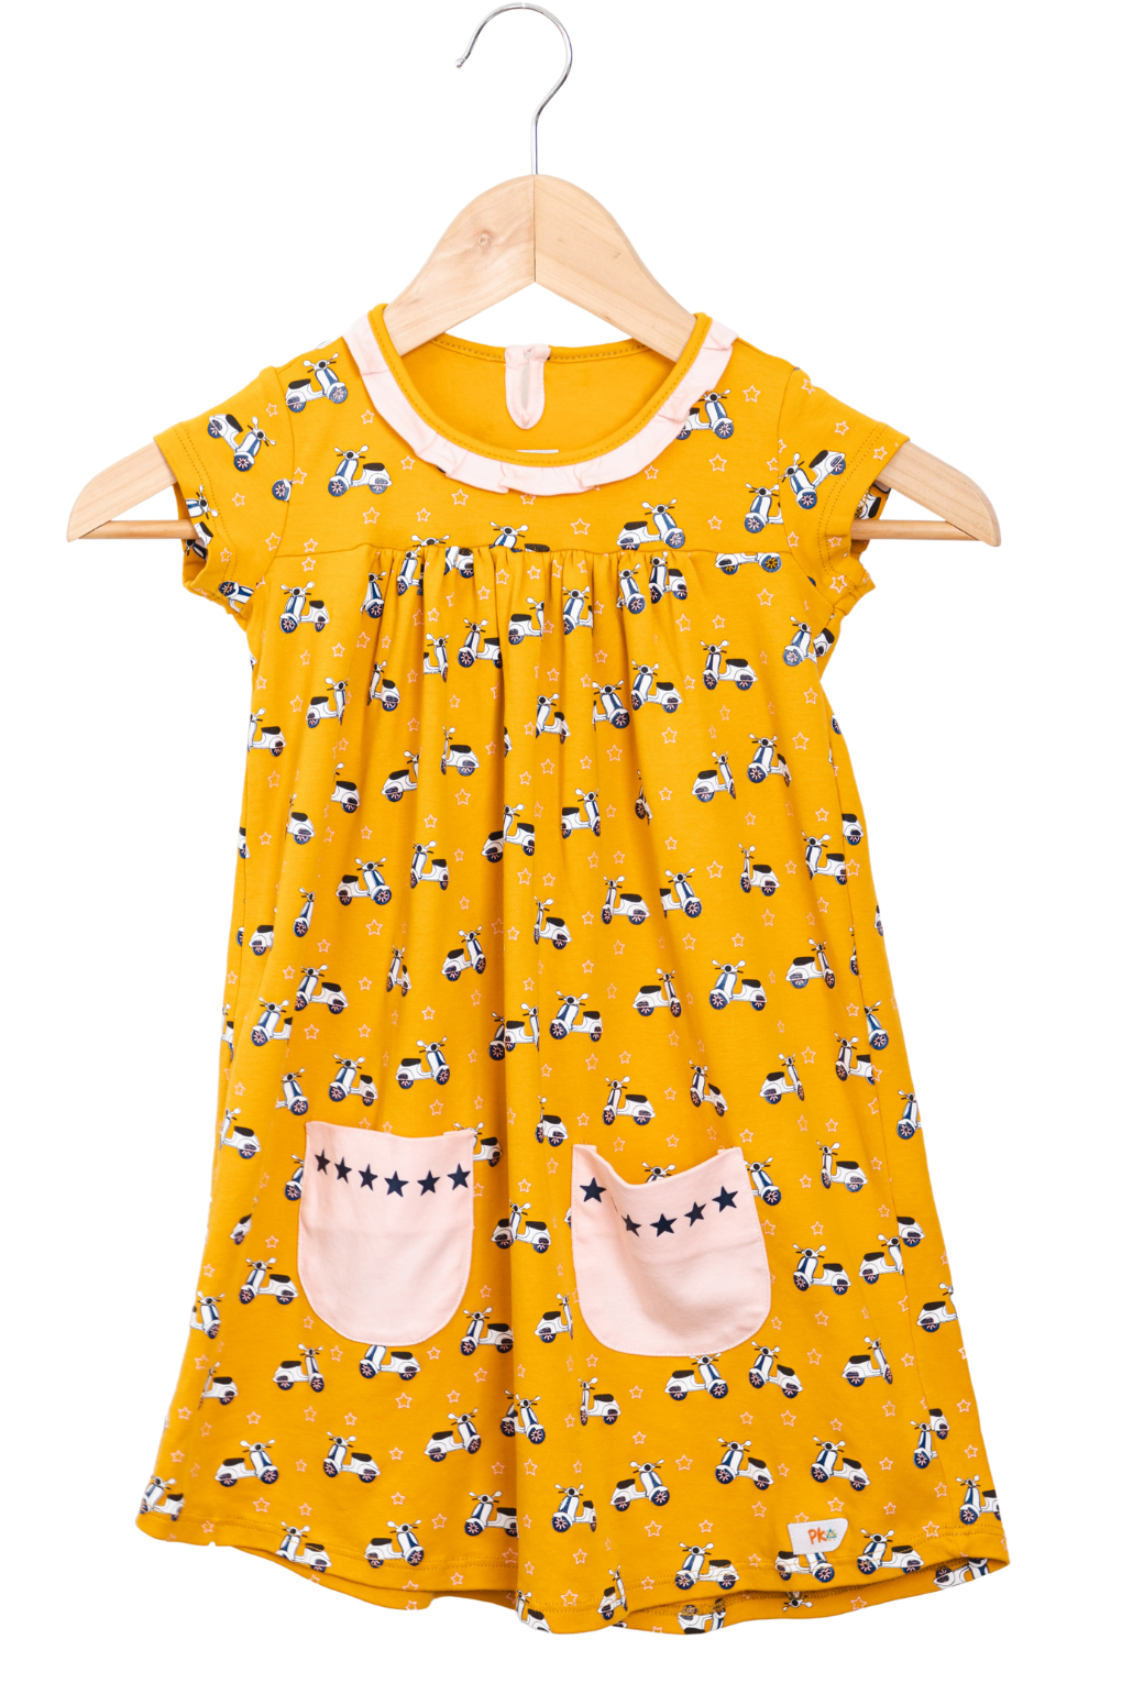 Vespa dress in yellow, eco-friendly materials, front pockets and non-stereotypes design.